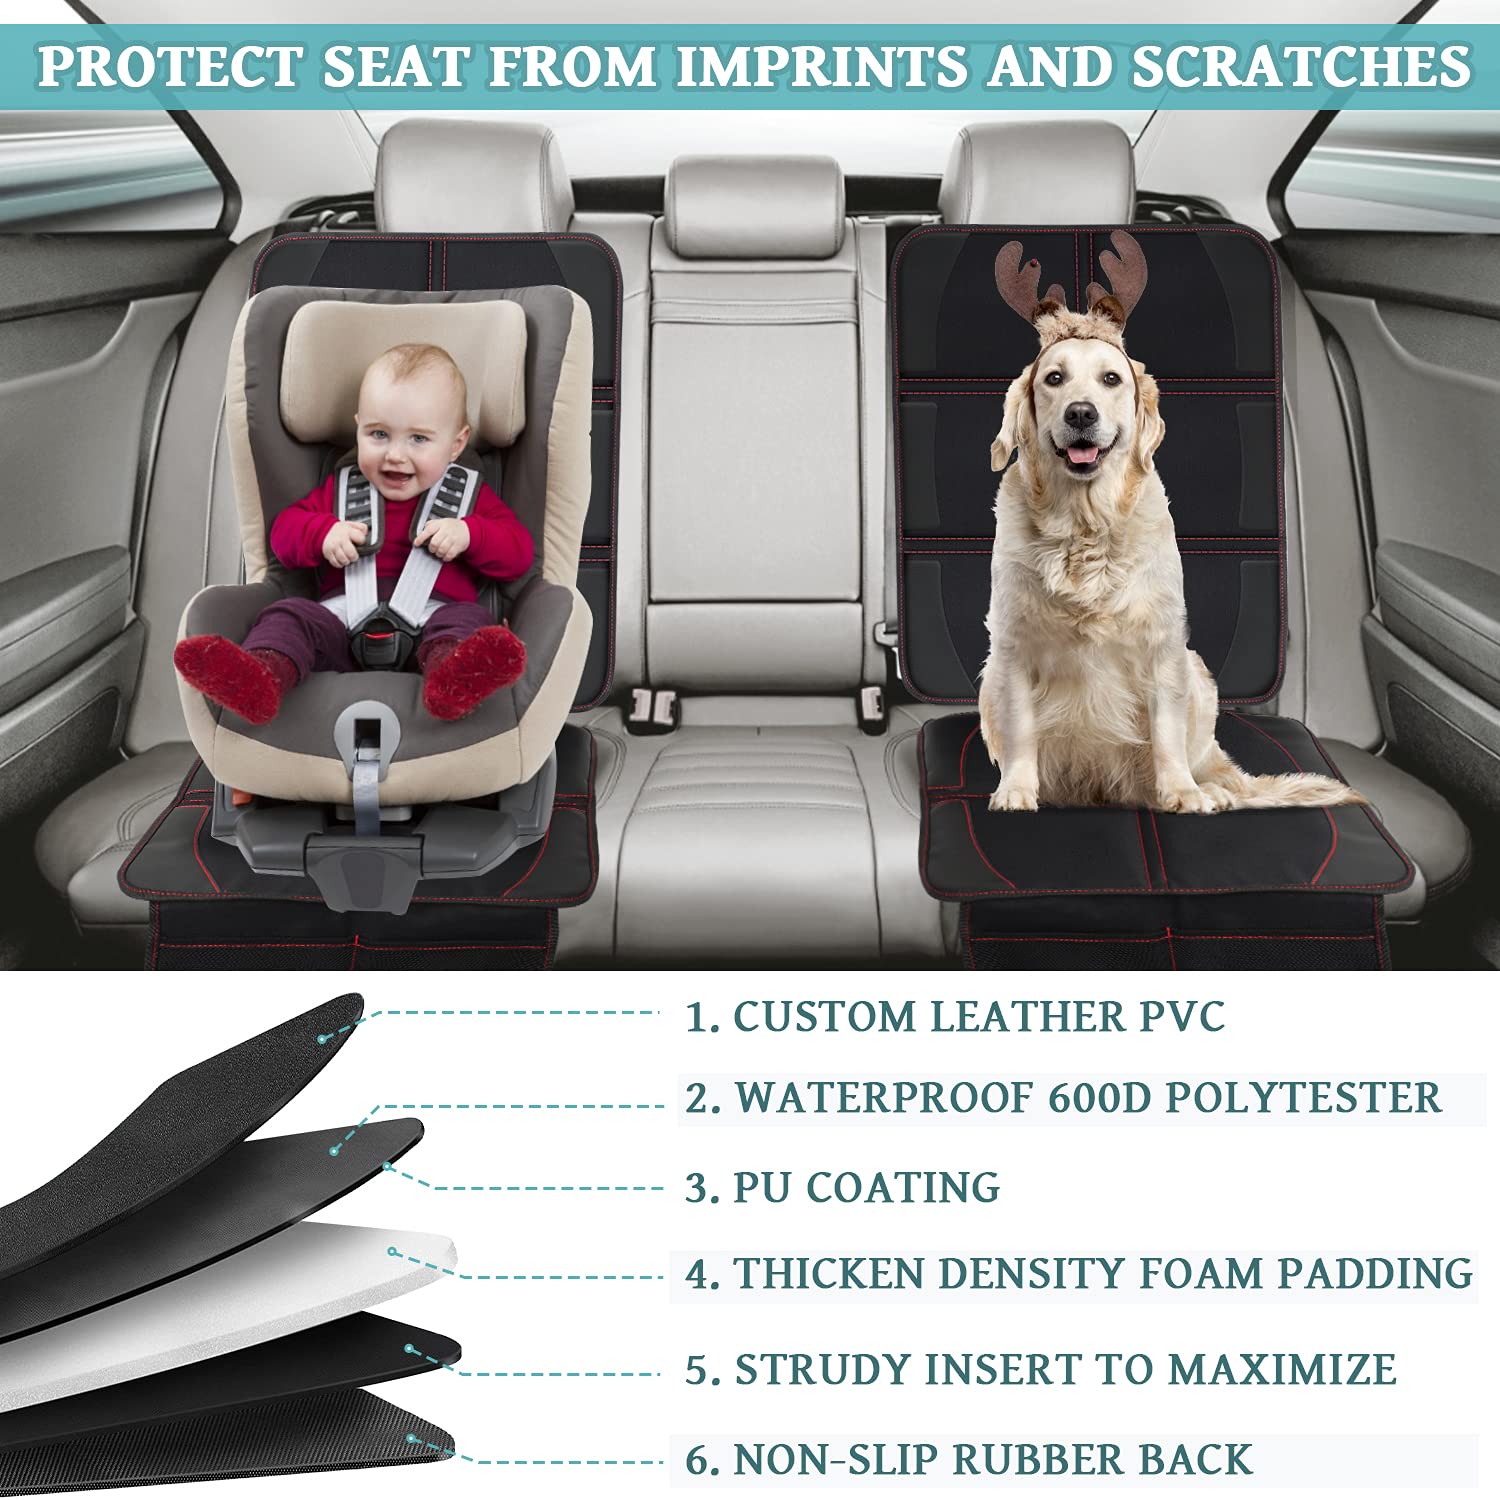 DOVODA Car Seat Protector, 2 Pack Large Auto Seat Protectors Protect Child Seats with Mesh Pocket, Thickest Padding Pat Durable, Waterproof 600D Fabric, Child Car Seat Cover for SUV Sedan Truck